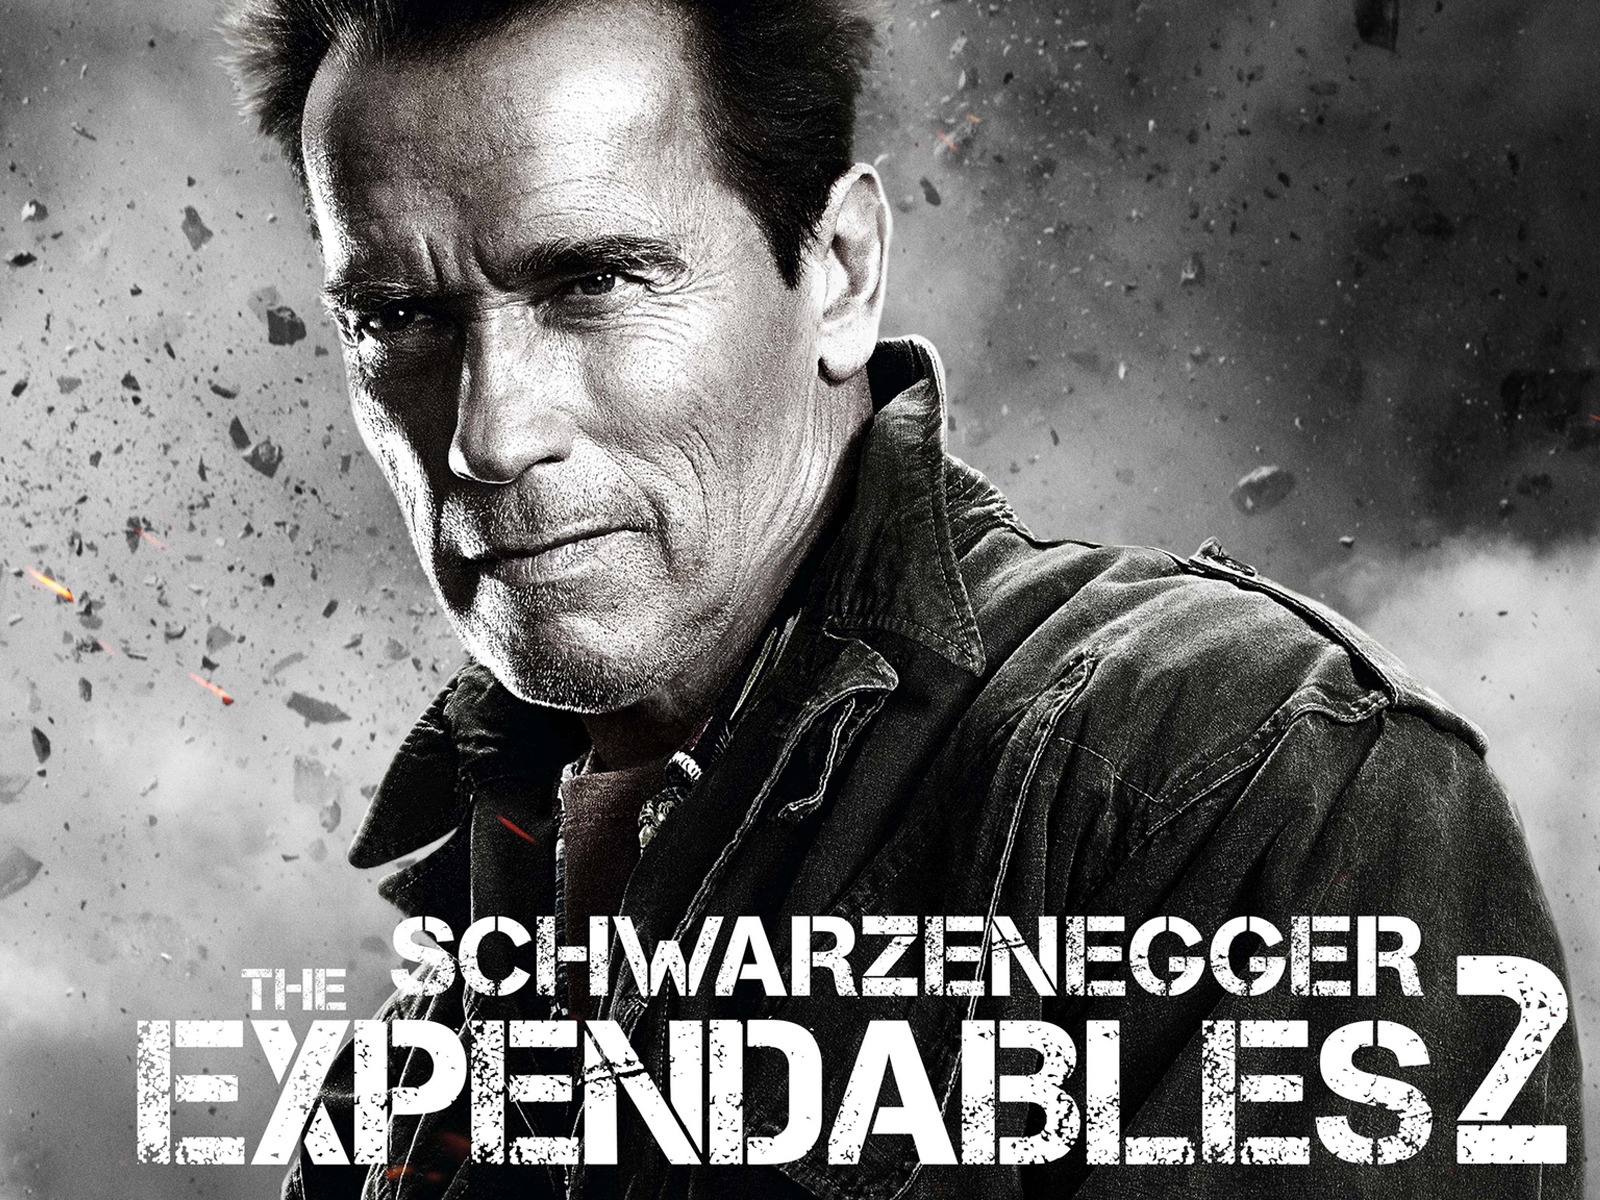 Arnold Schwarzenegger Expendables 2 for 1600 x 1200 resolution